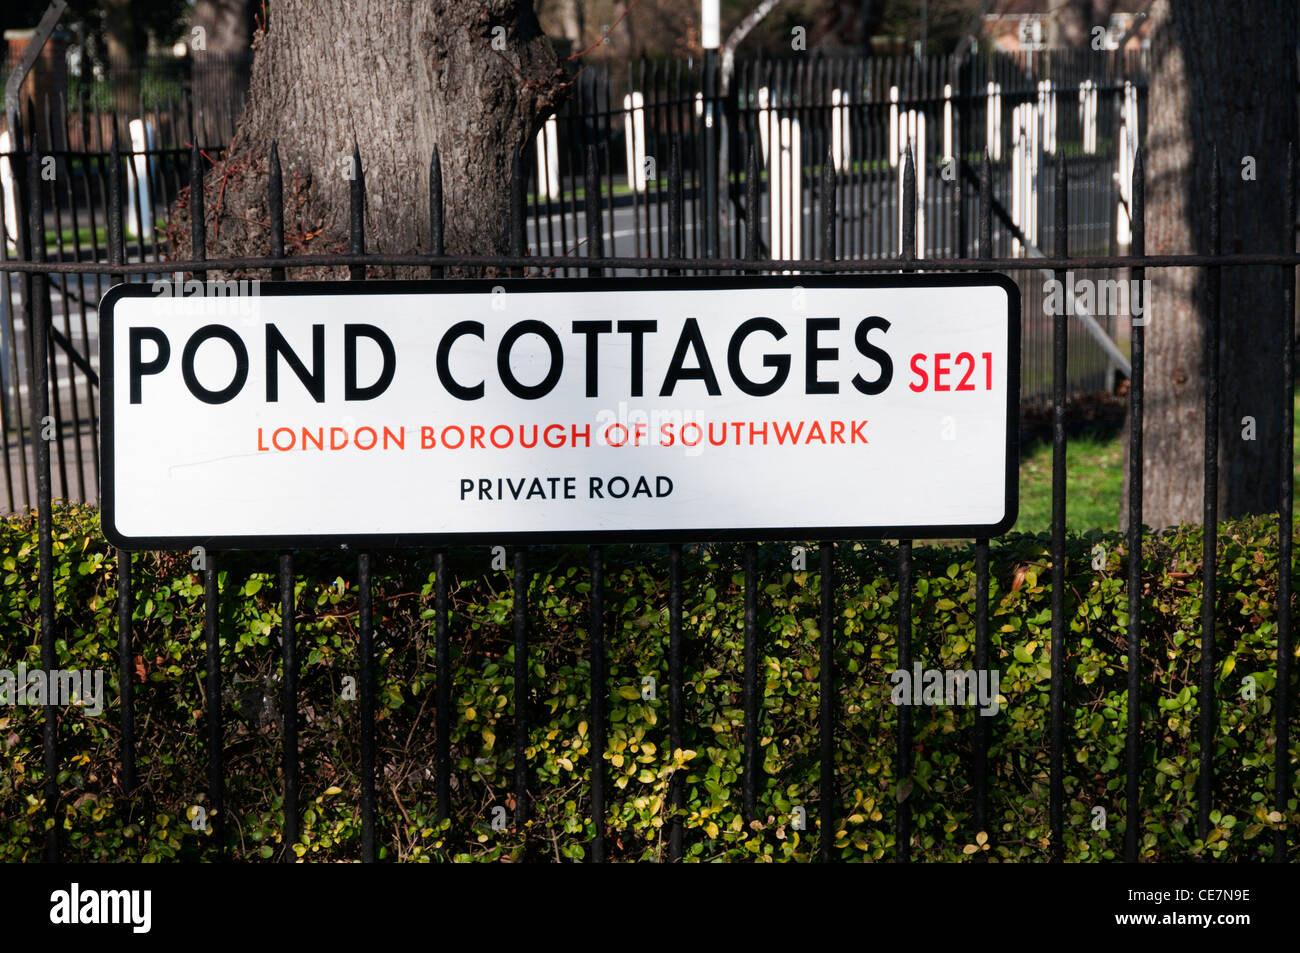 Street sign for Pond Cottages in Dulwich, London Borough of Southwark, SE21 Stock Photo